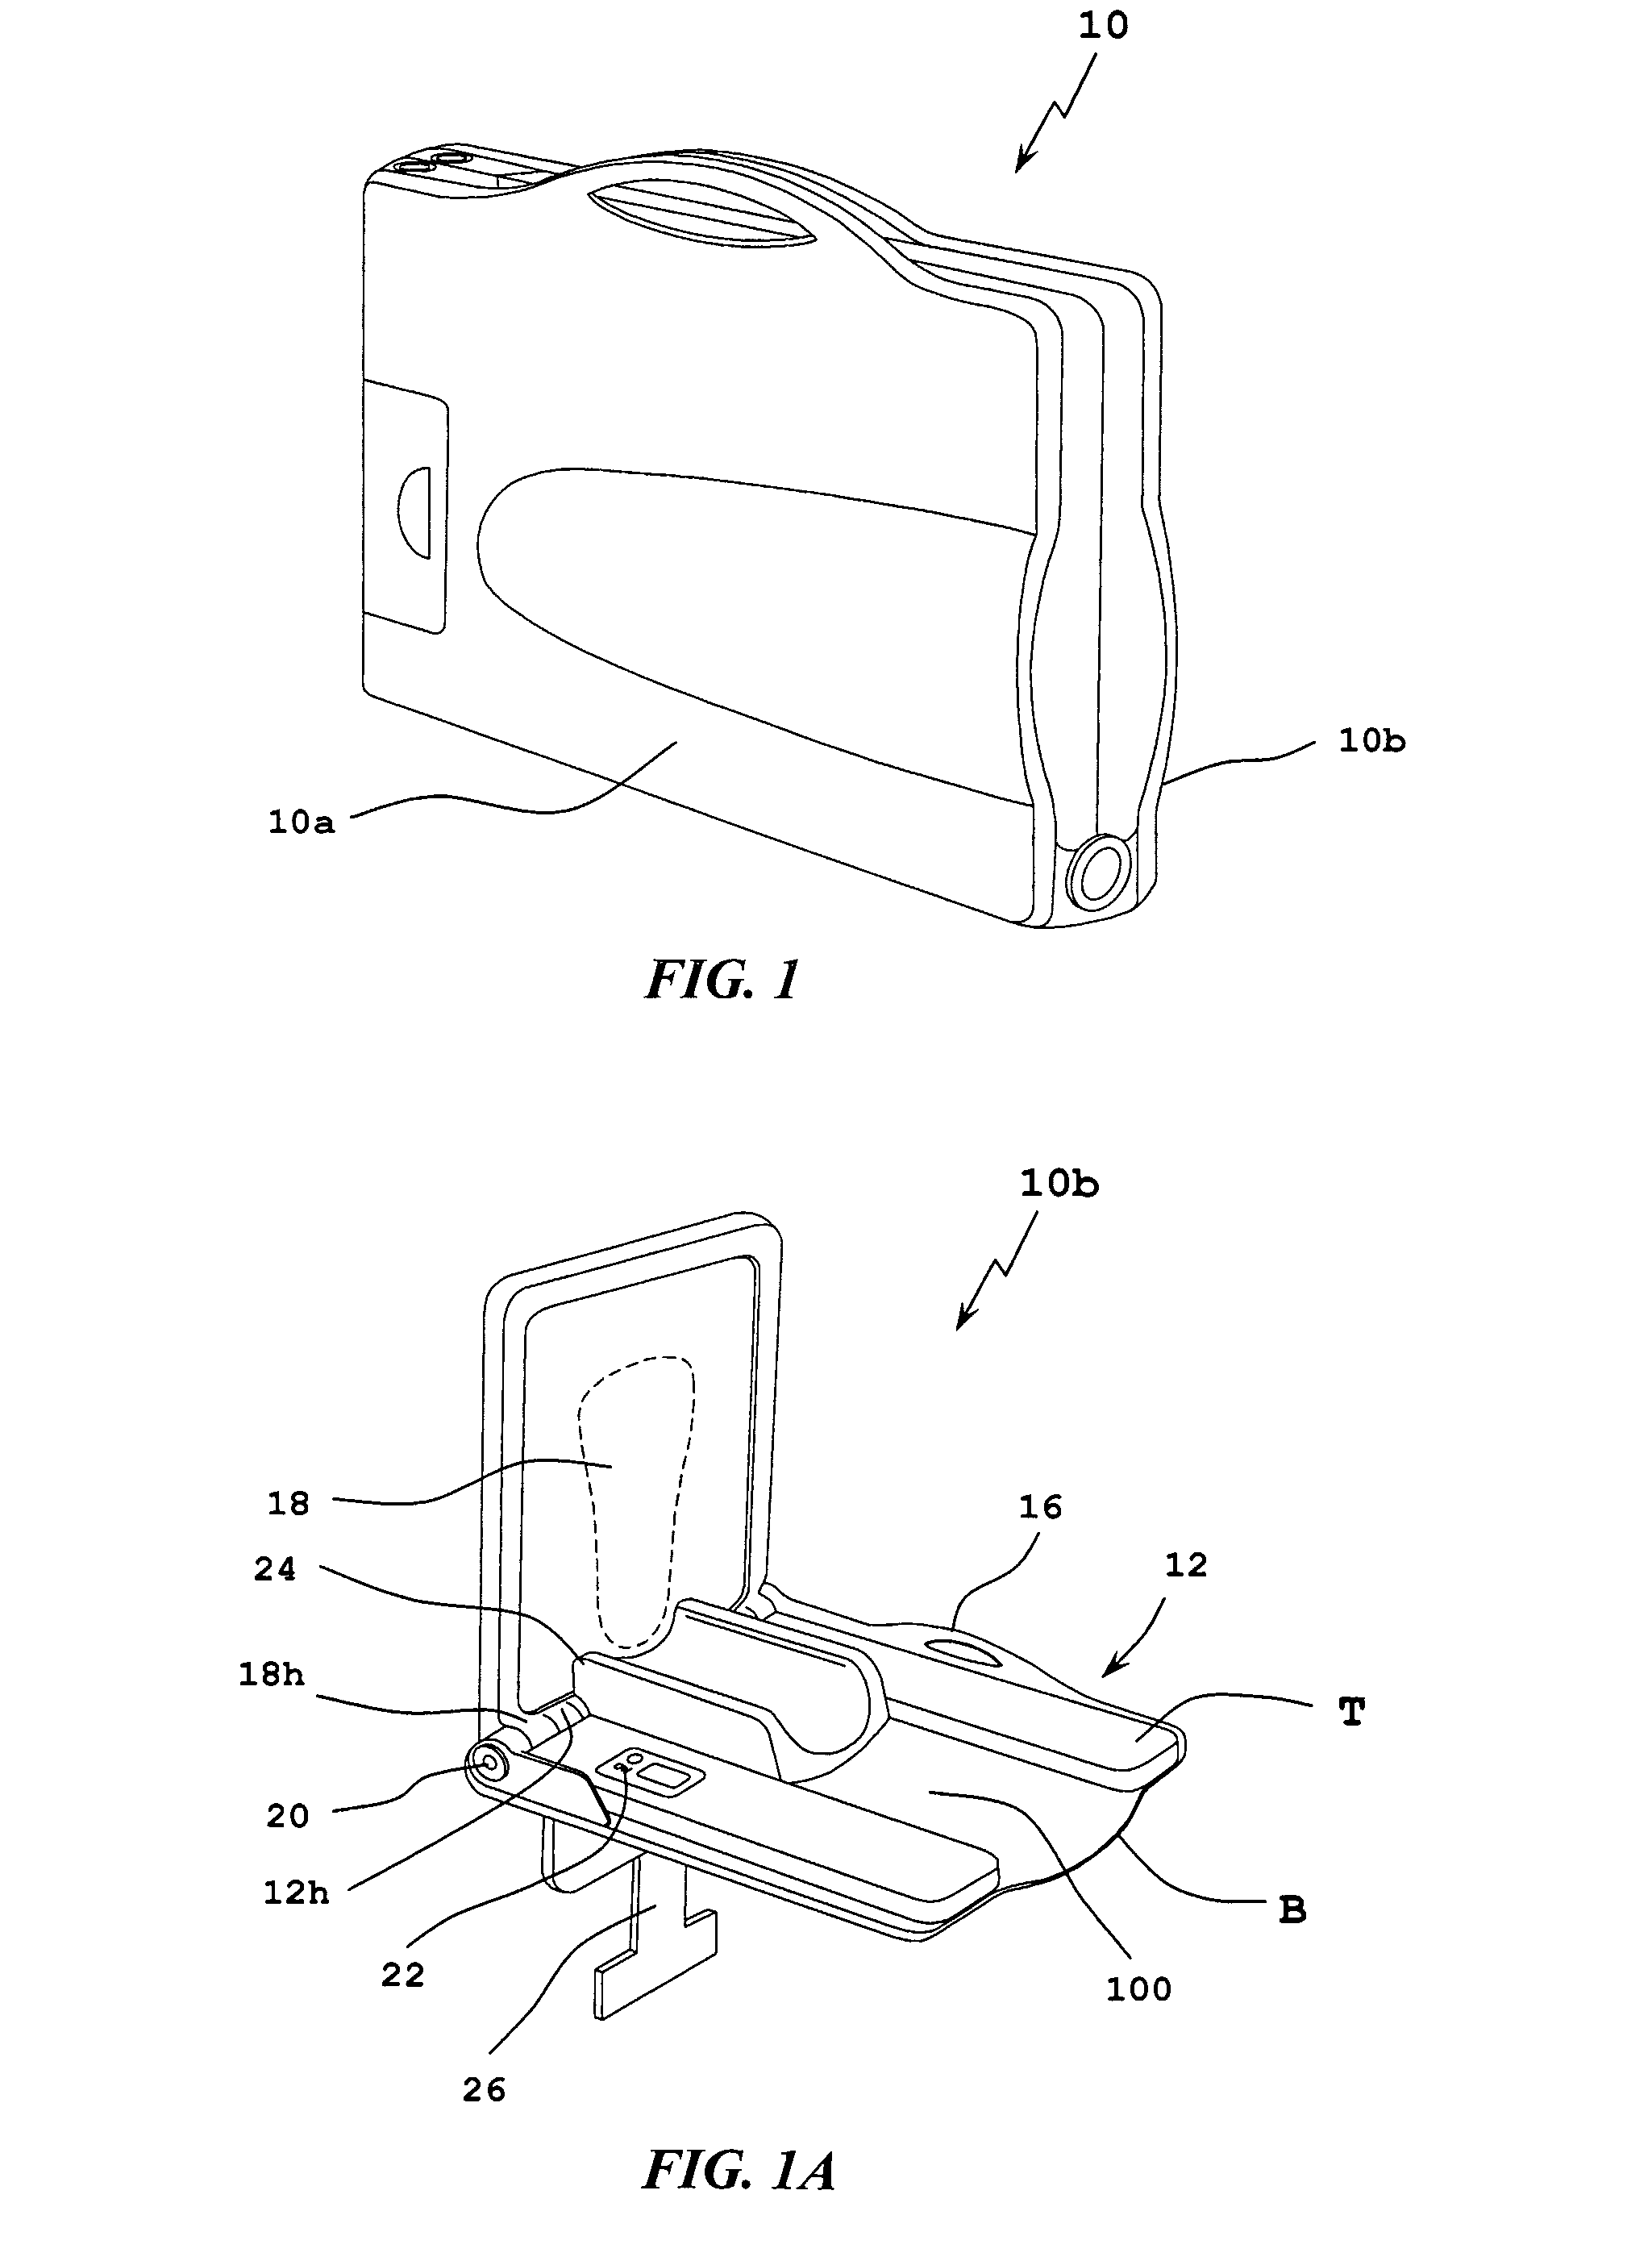 Vibrational therapy assembly for treating and preventing the onset of deep venous thrombosis